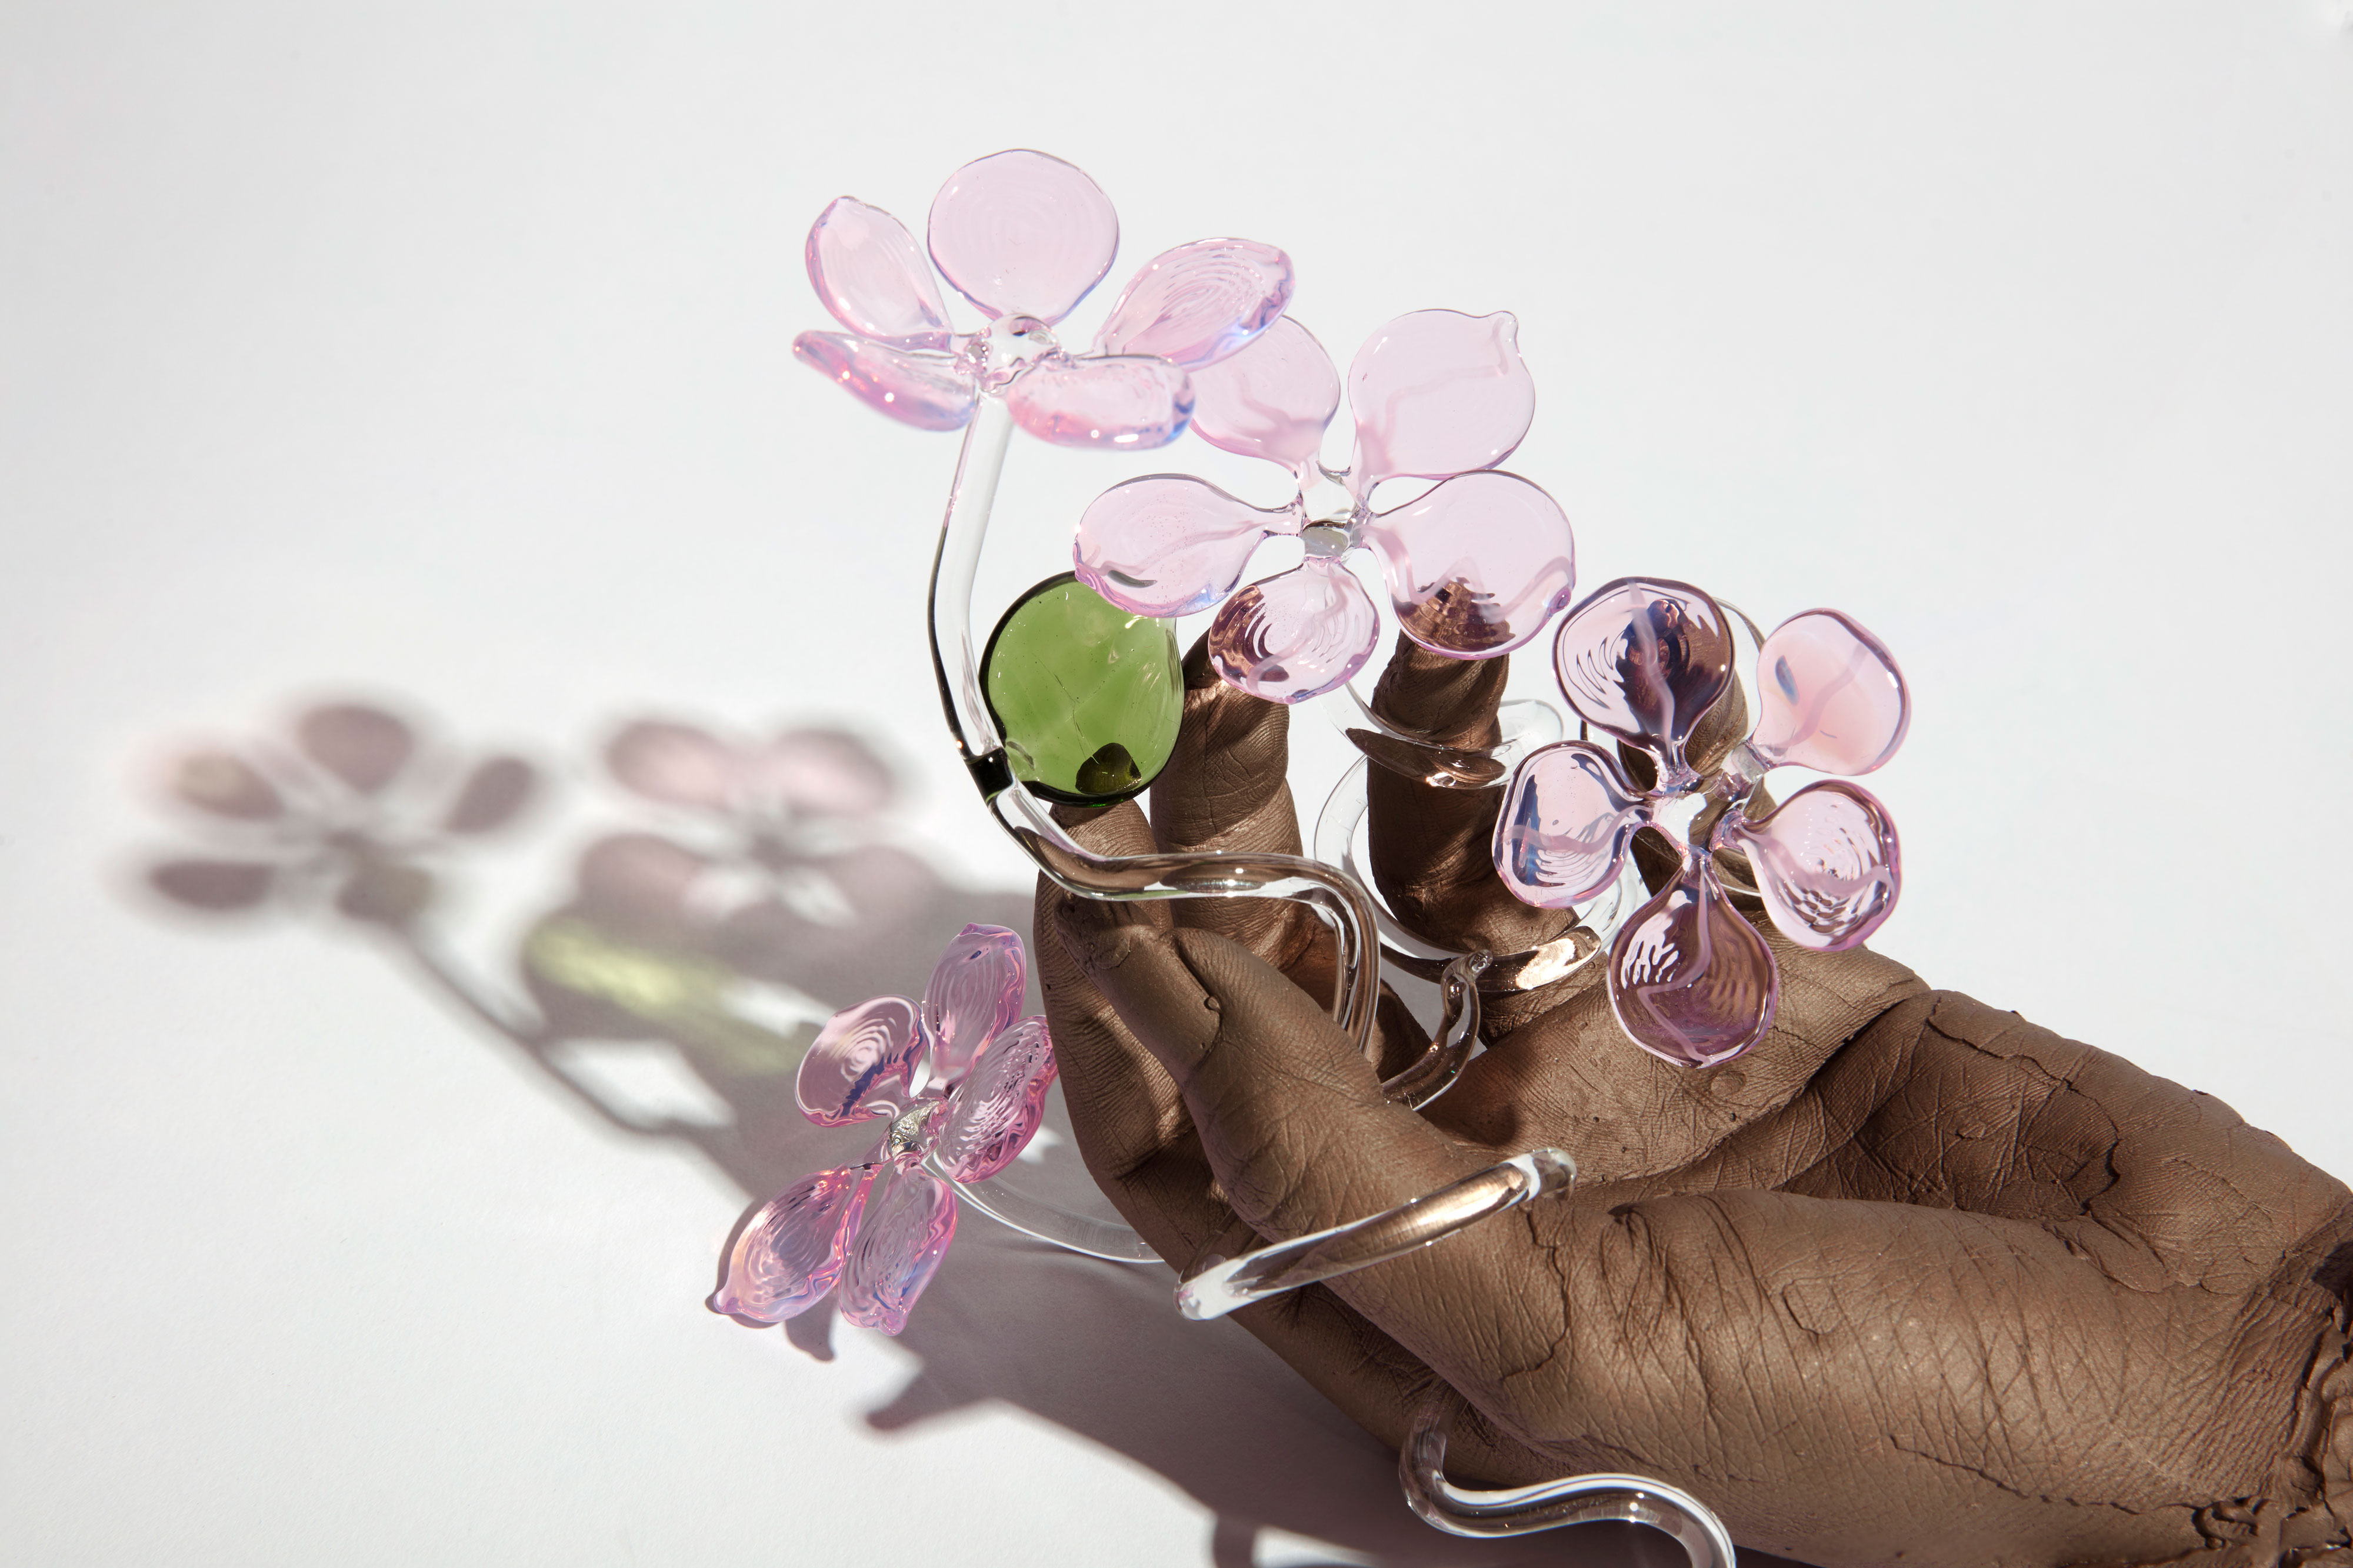 Kelly Akashi sculpture, bronze hand holding light pink glass flowers with green leaves